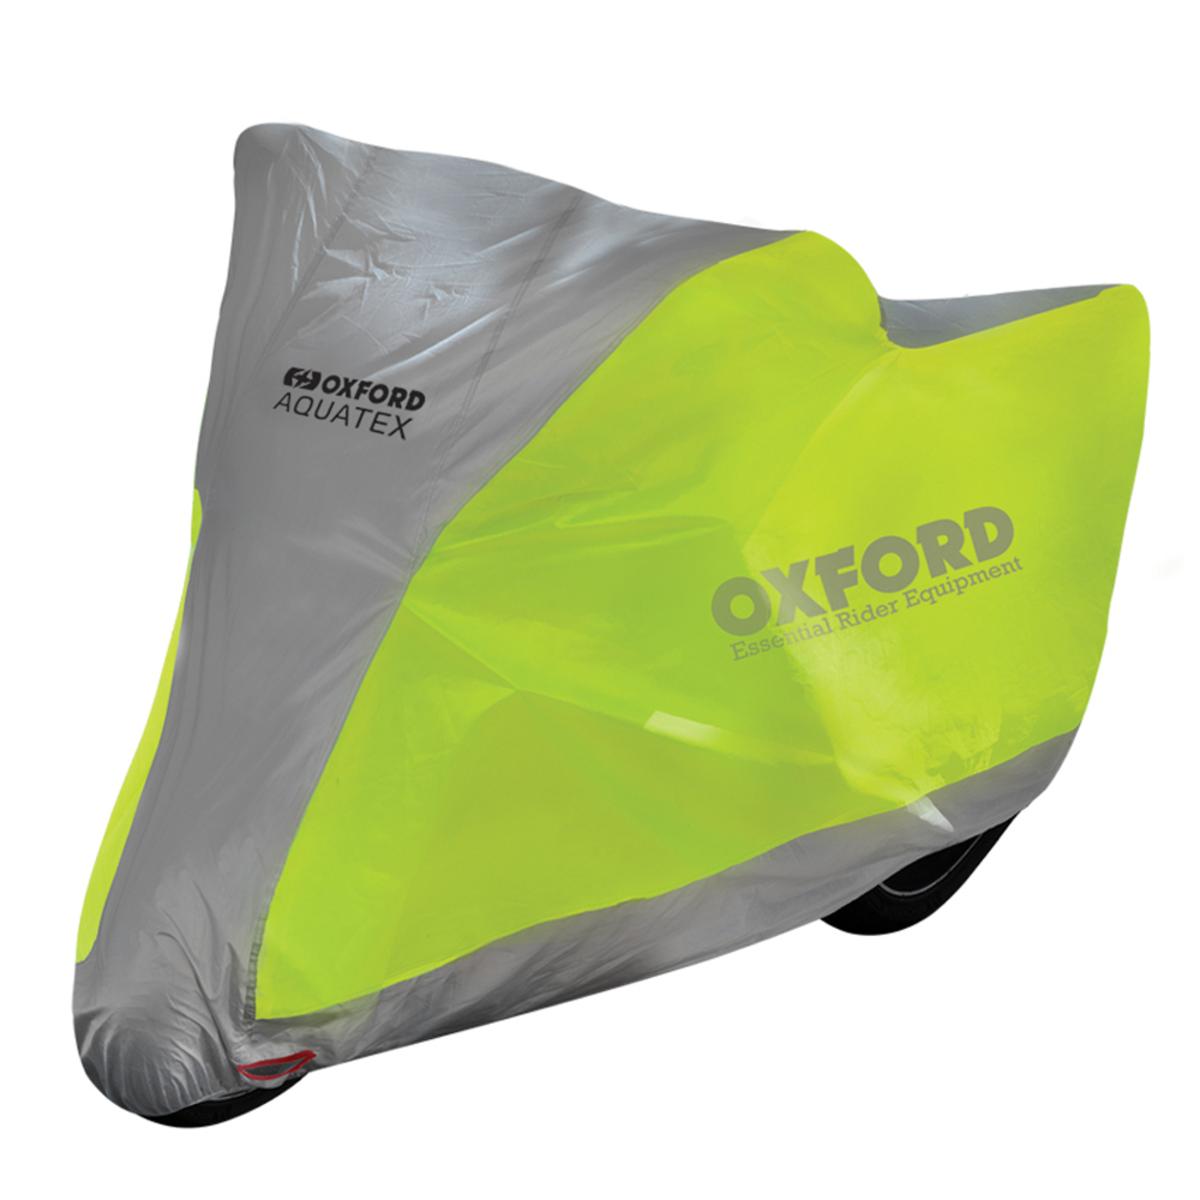 Oxford Aquatex Outdoor Motorcycle Protective Fluorescent Cover - Small